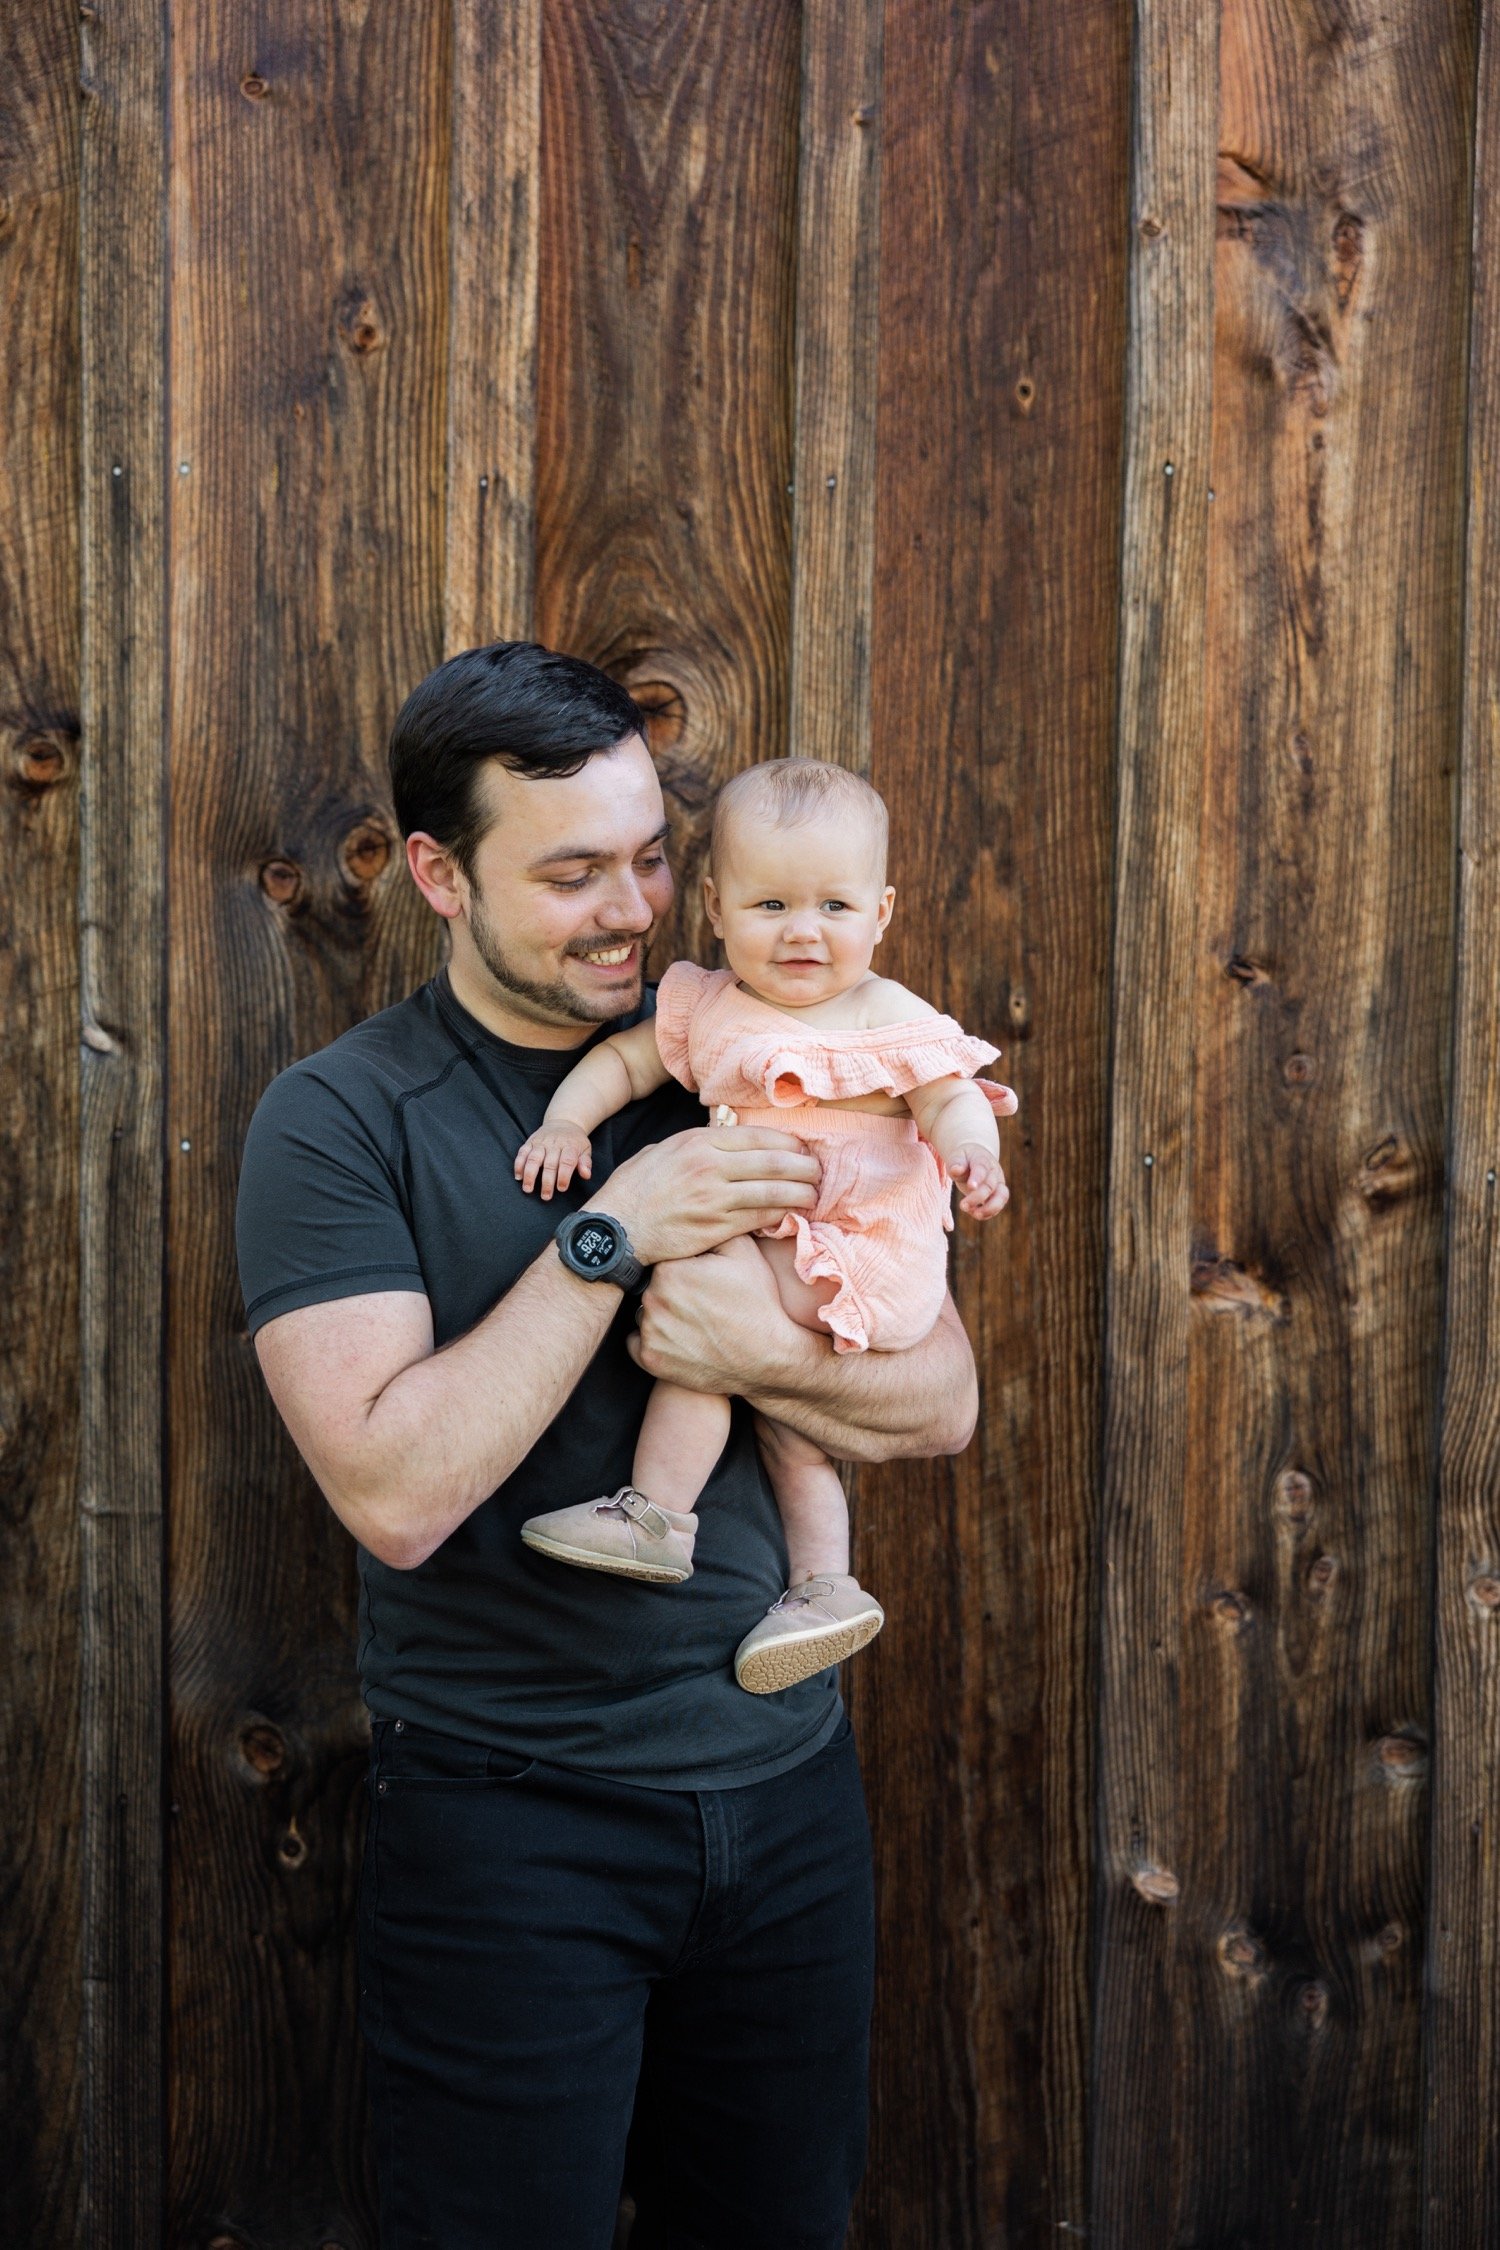 17_Portland Family Photo Session20_Man in black shirt and black jeans holds baby in pink dress while standing against wood wall.jpg